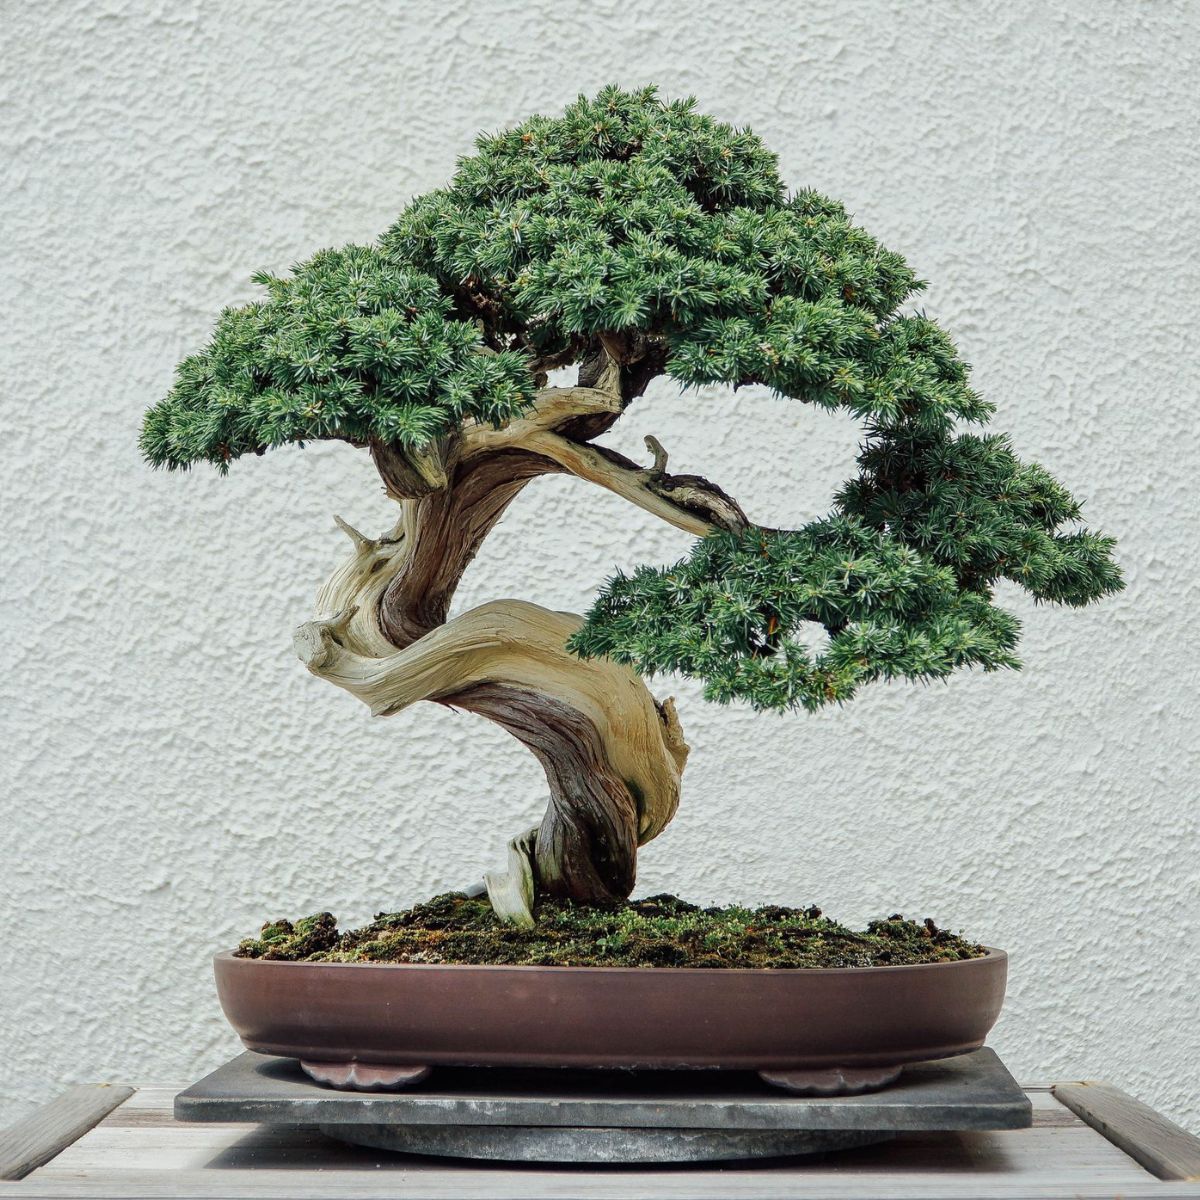 Bonsai are one of the most popular houseplants to have a miniature tree at home on Thursd